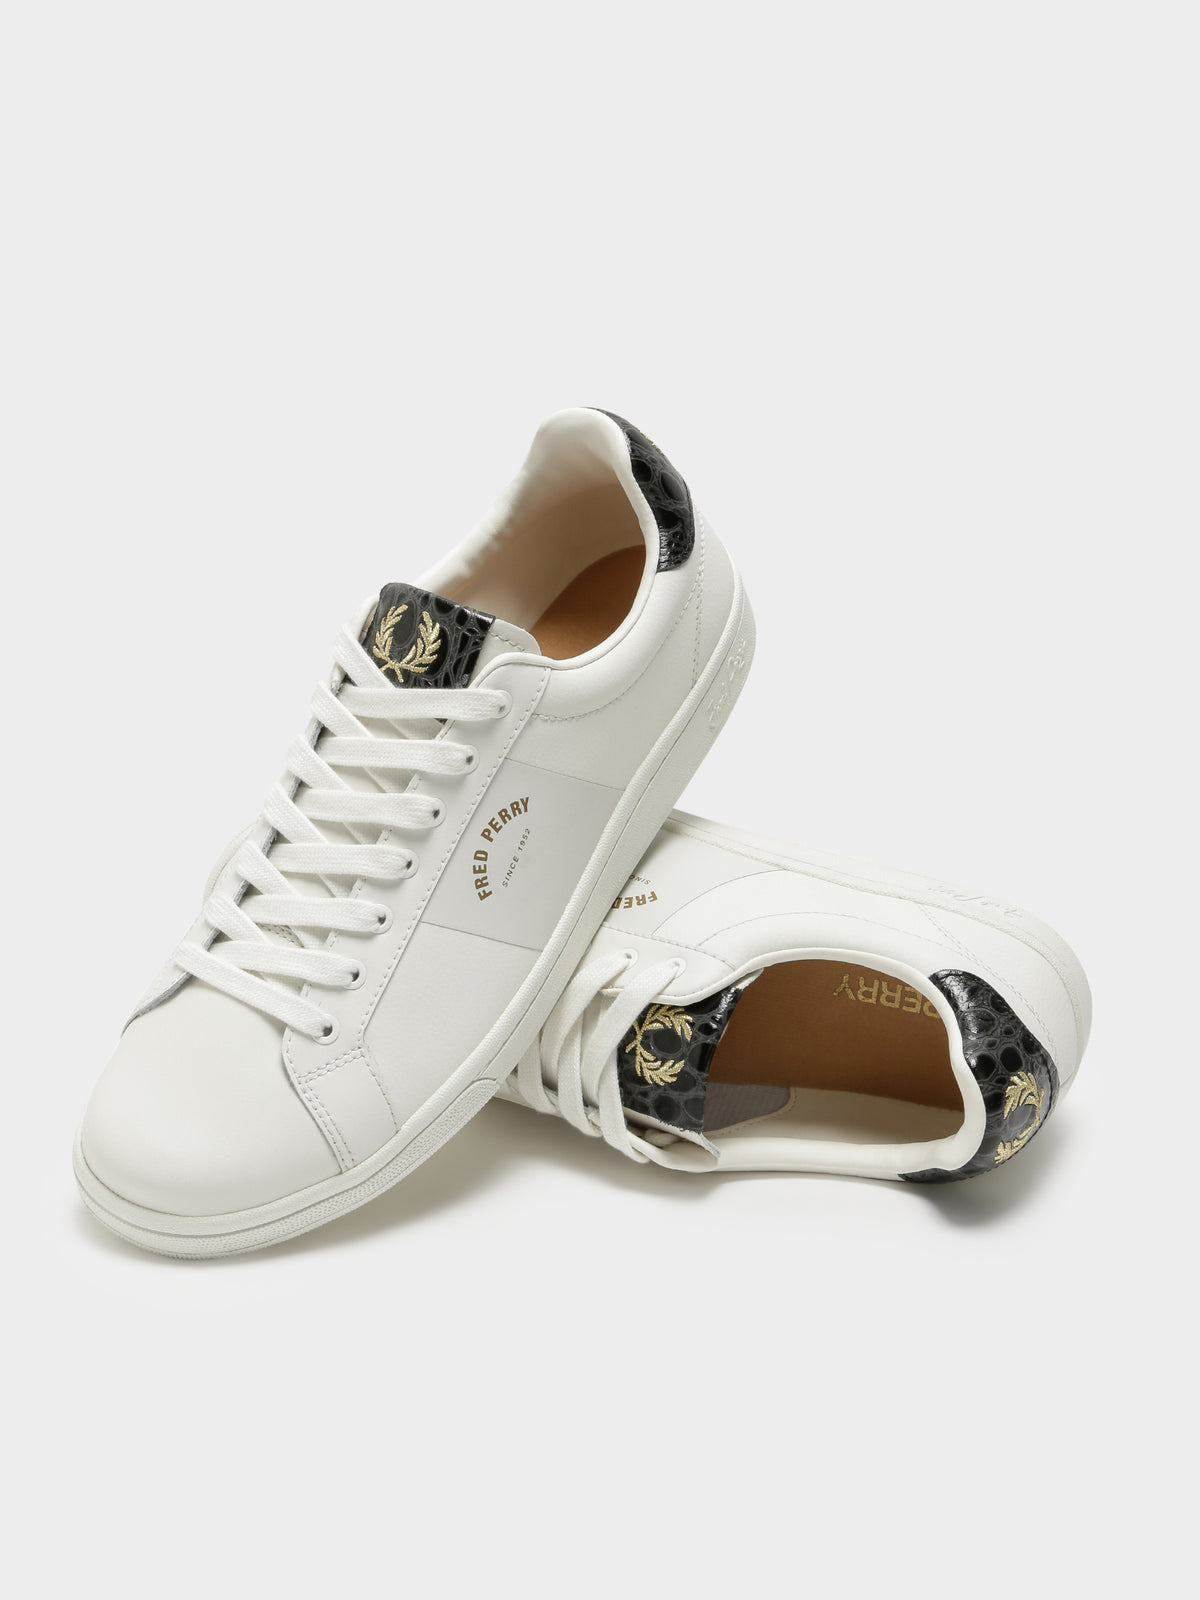 B721 Leather Arch Branded Sneakers in Snow White